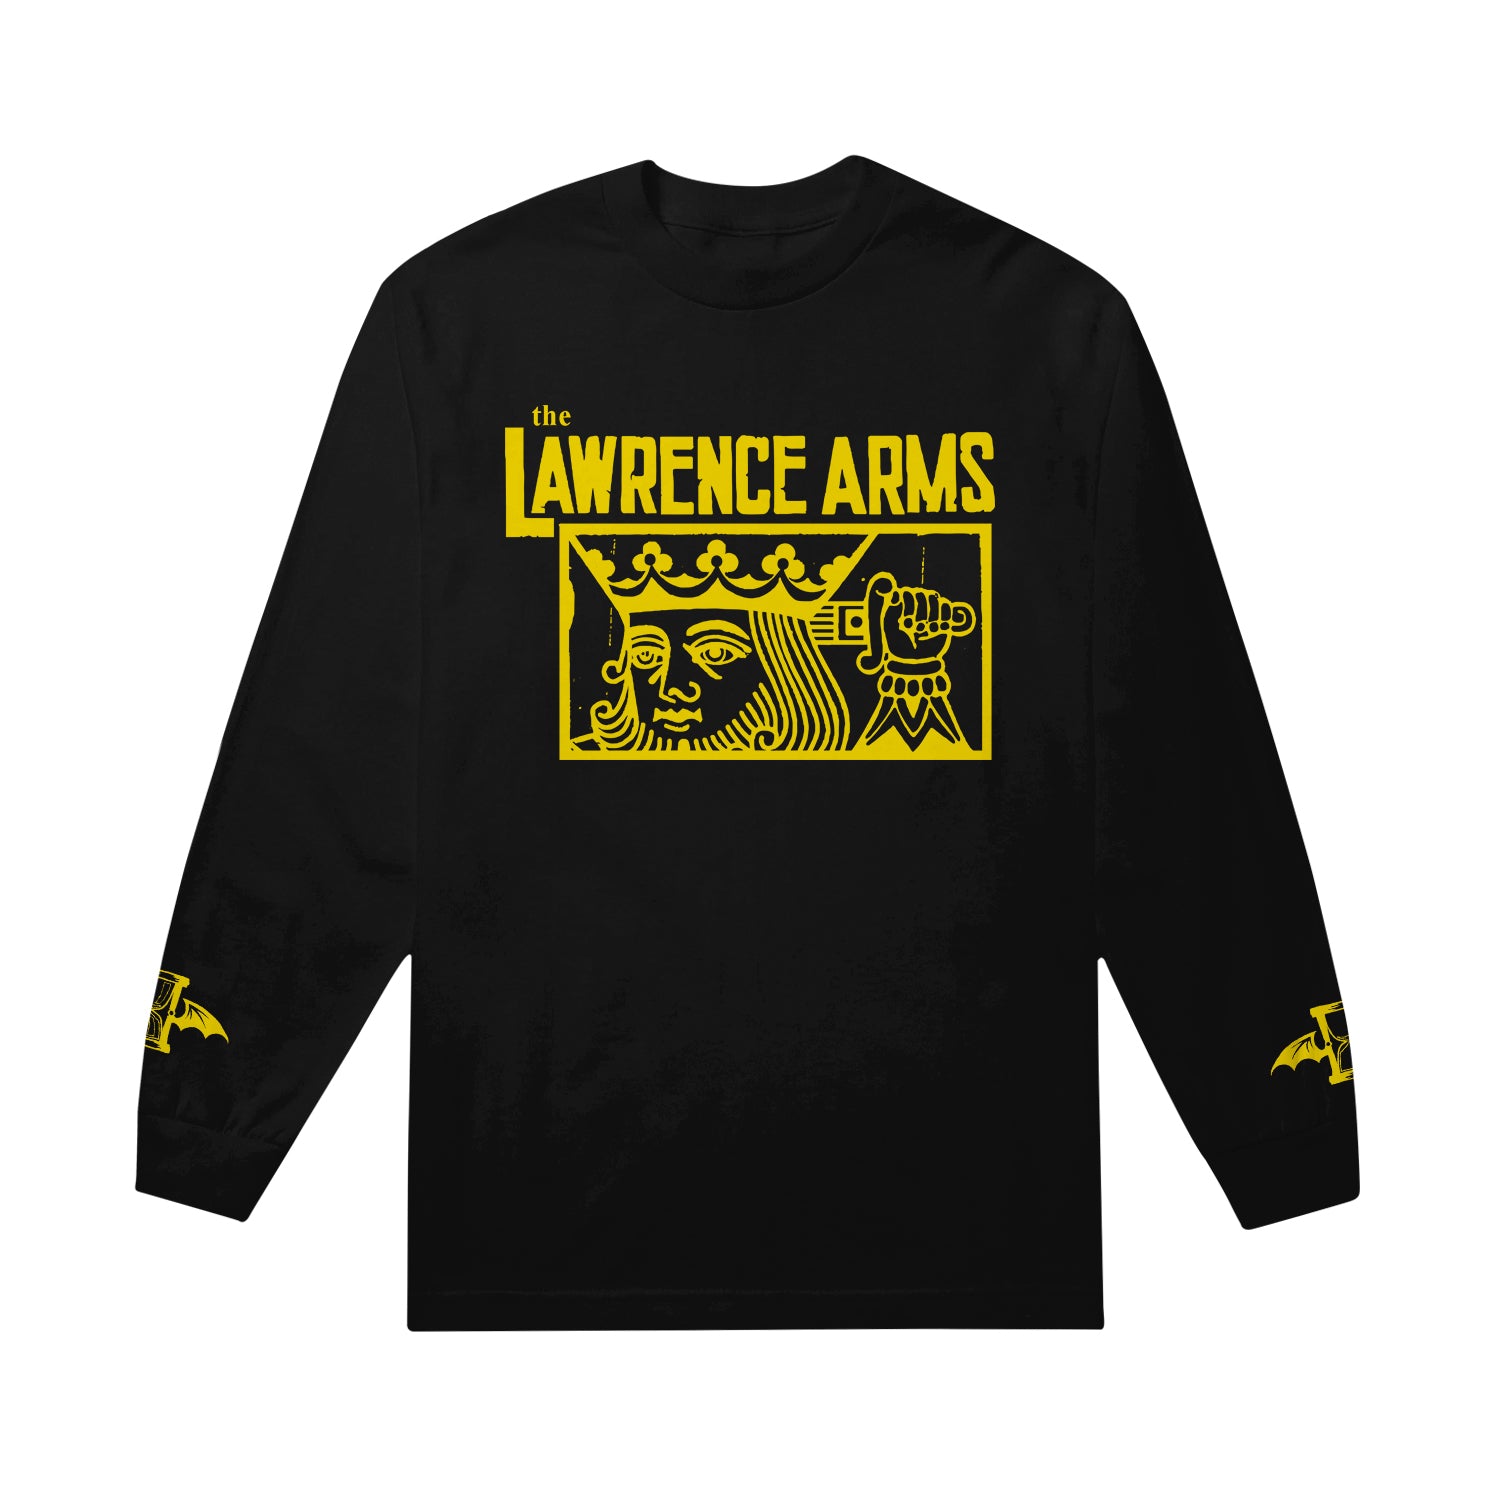 Image of a black longsleeve against a white background. Across the chest in yellow text reads "the lawrence arms". Below that inside of a yellow outlined rectangle is a graphic of a king holding a sword behind his head. The cuffs of the sleeves feature the lawrence arms logo in yellow- an hourglass with wings.